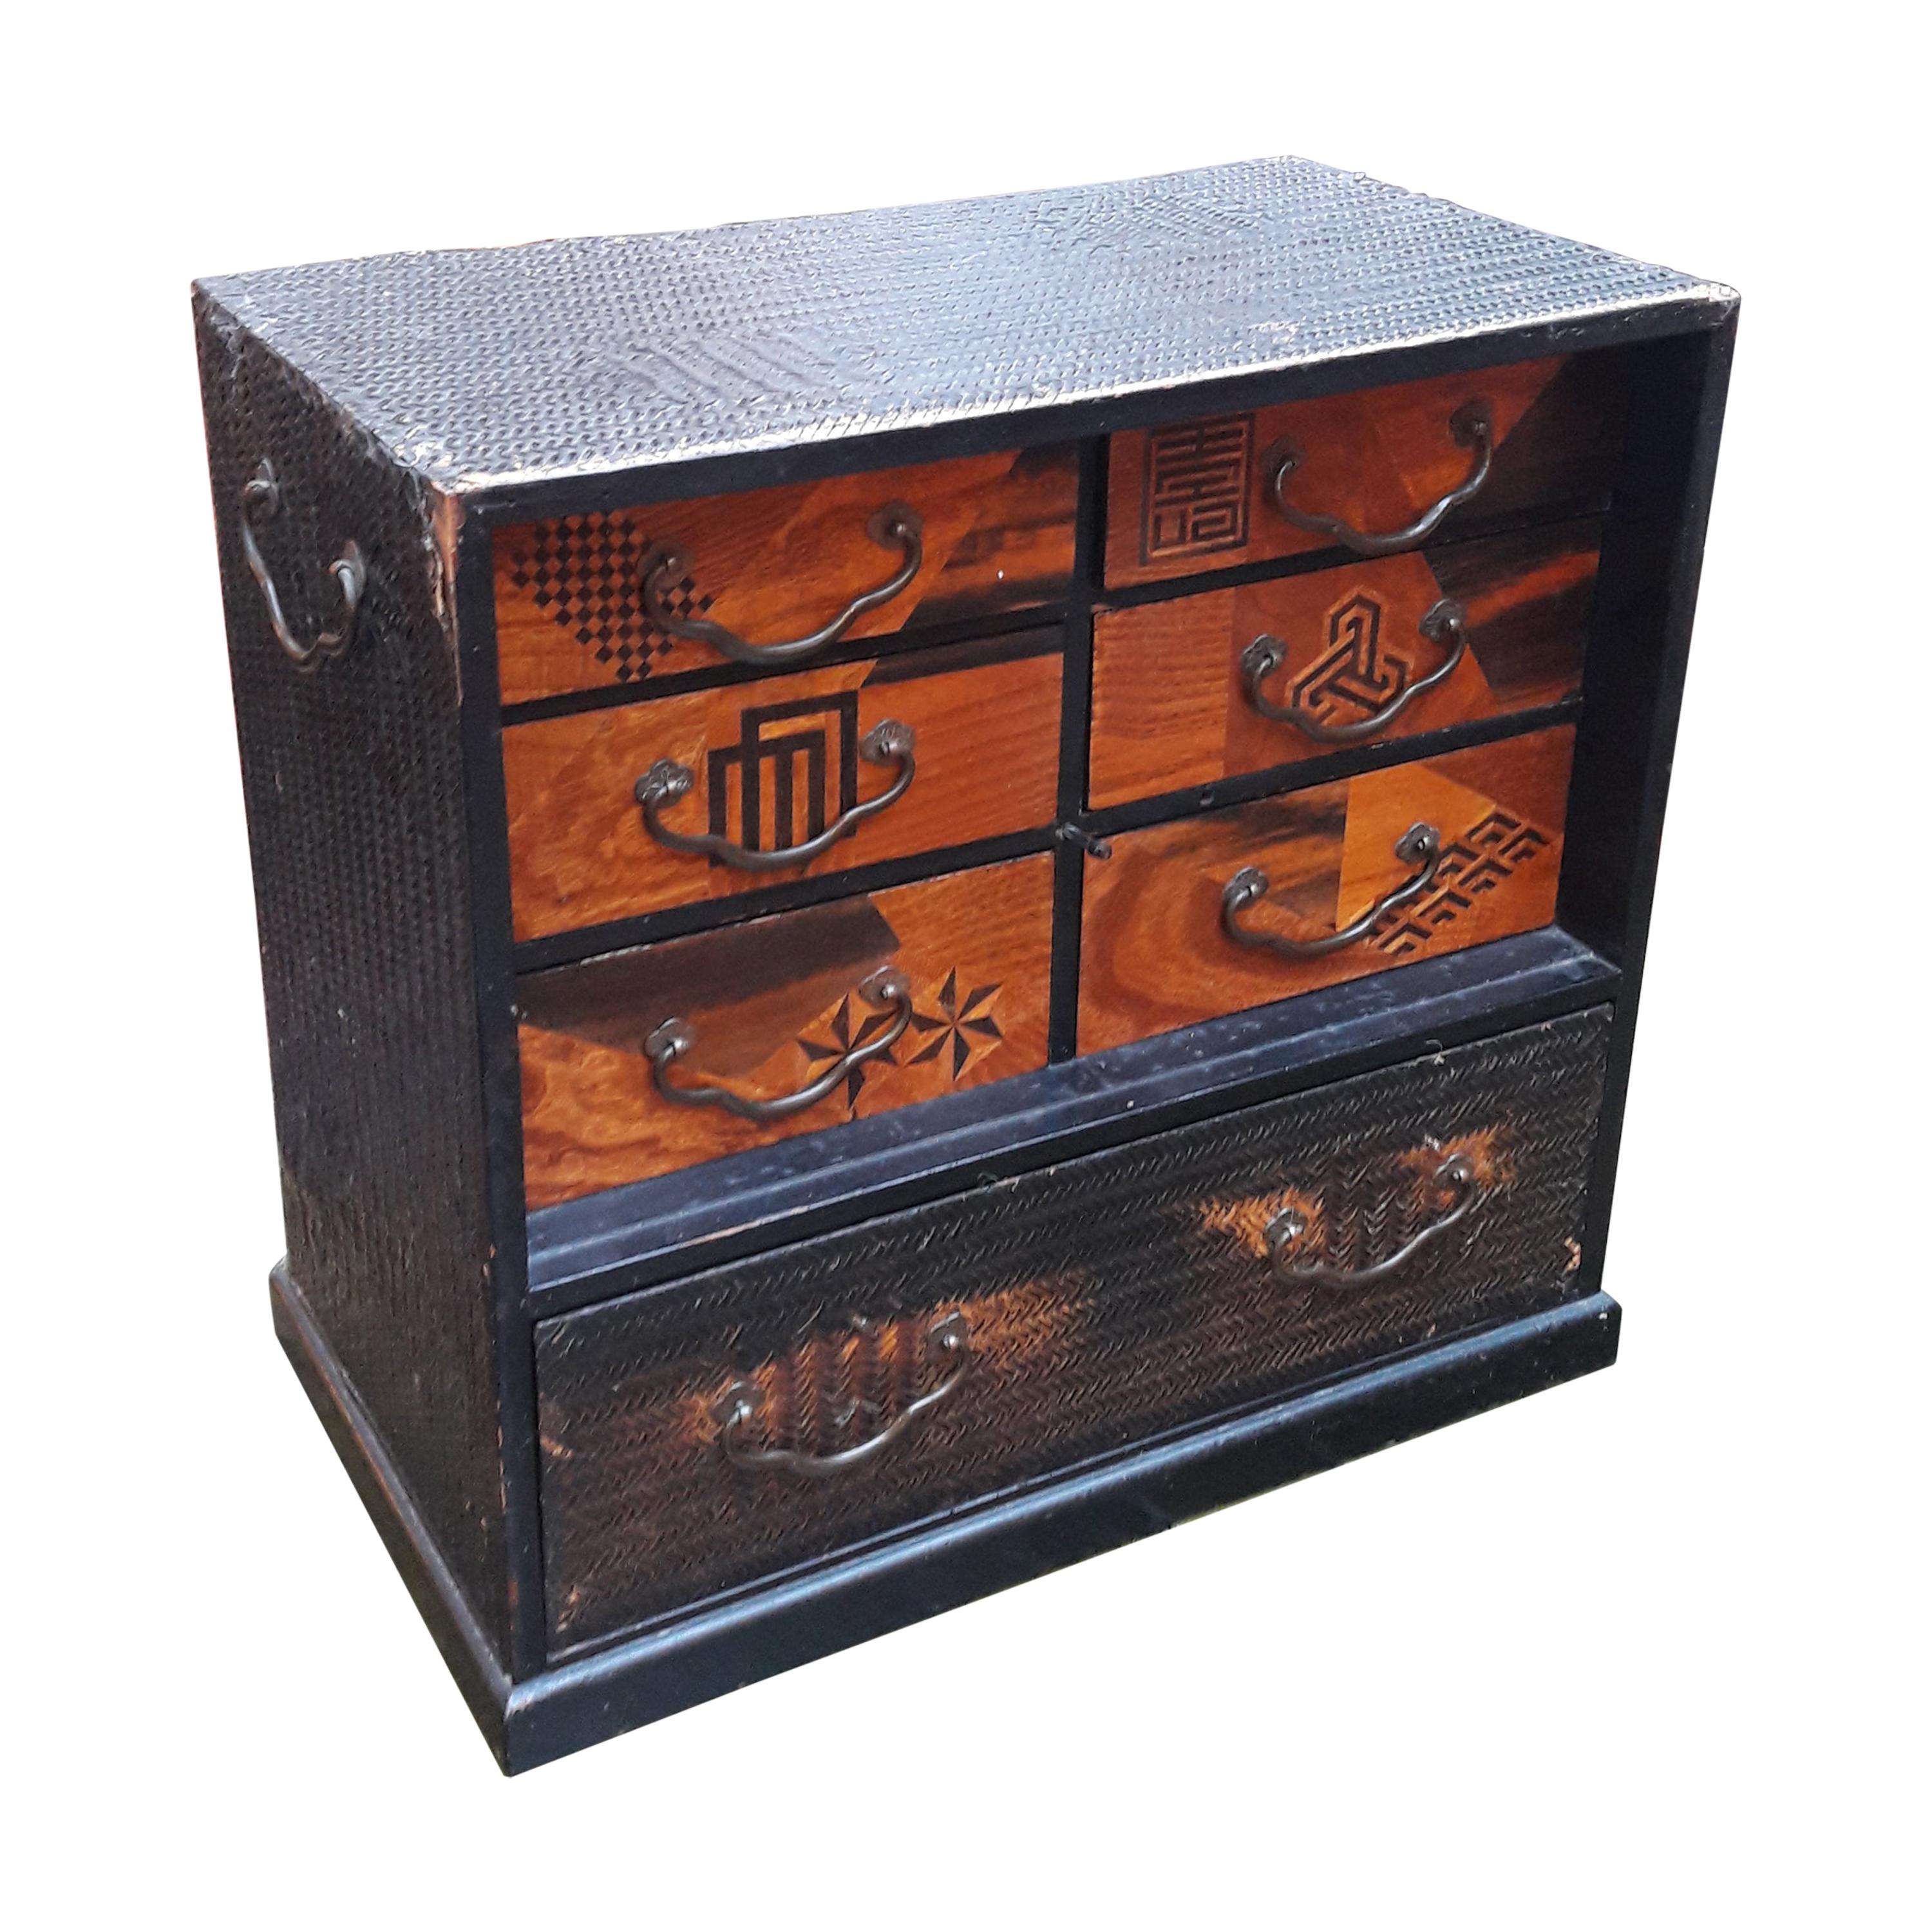 Japanese Jewelry Box For Sale